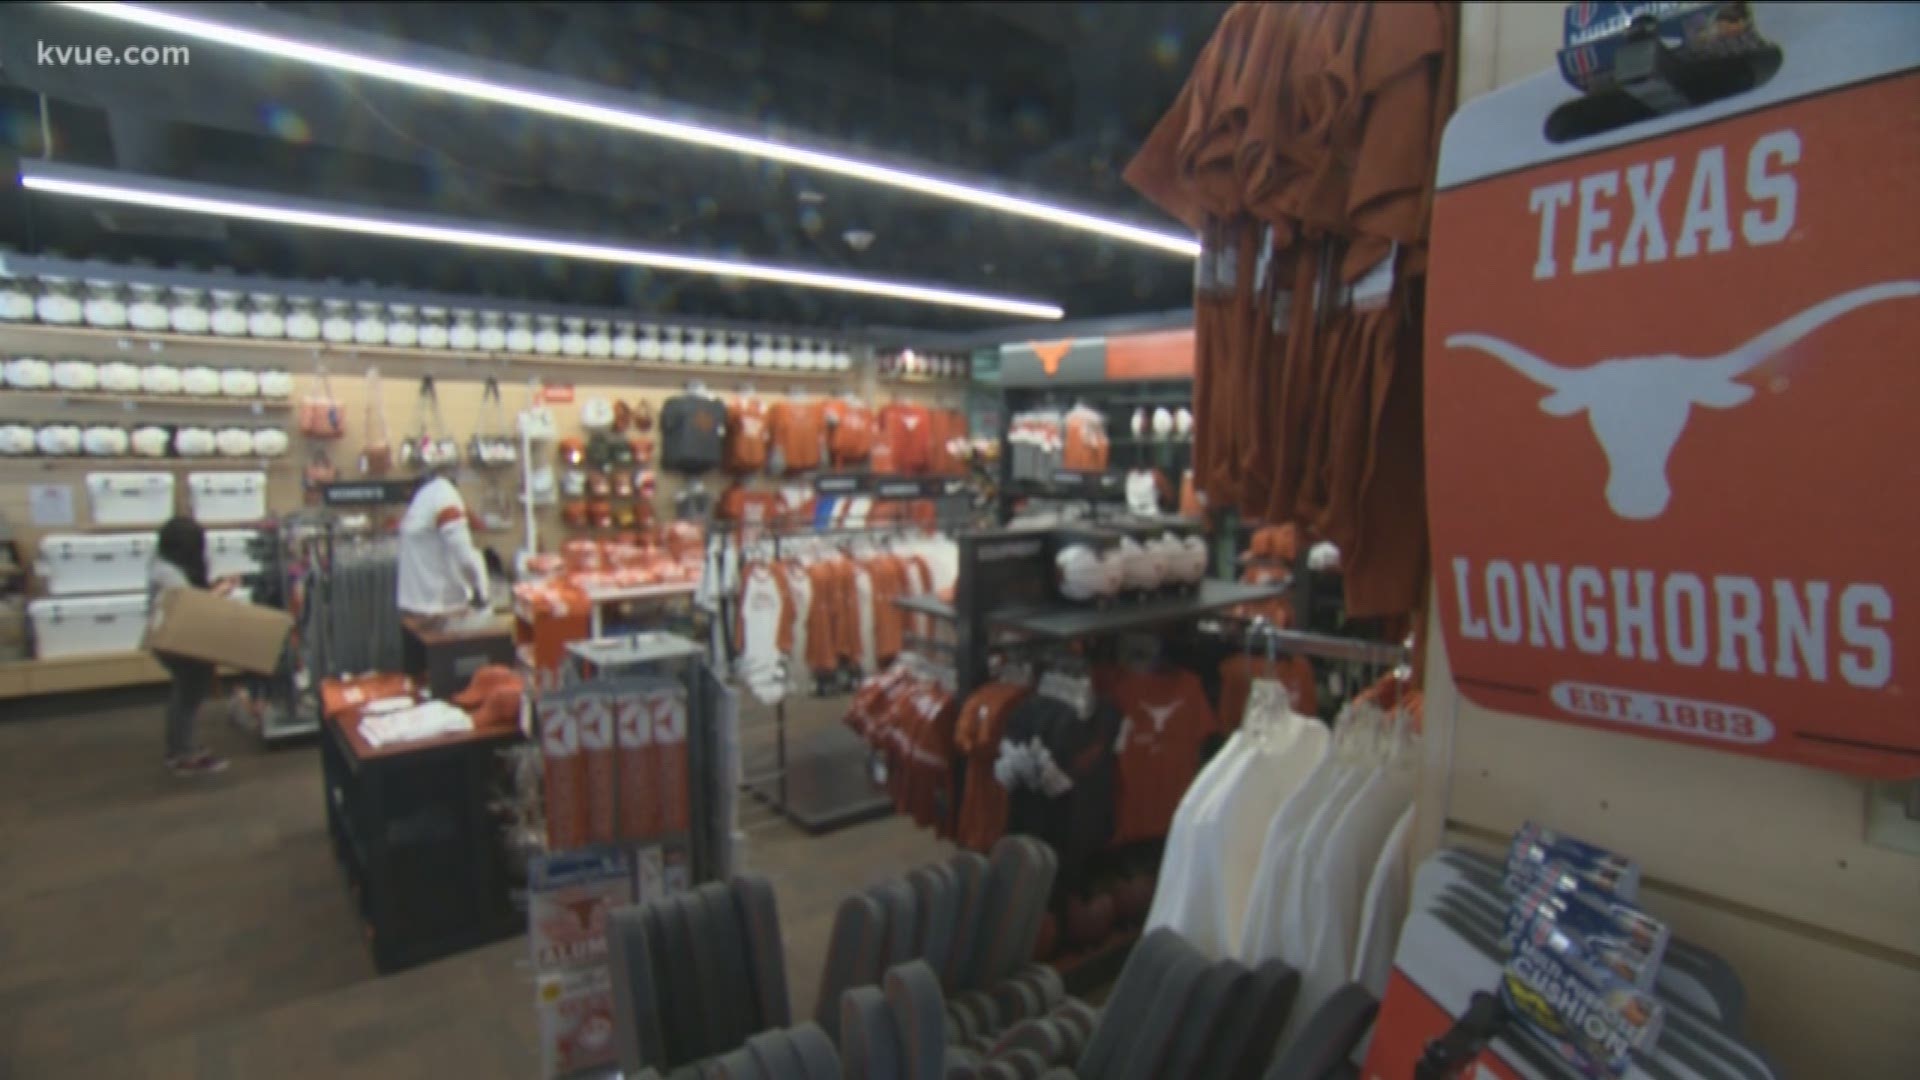 UT wants fans to know there are counterfeit jerseys and shirts being sold – and police are ready to put a stop to it.